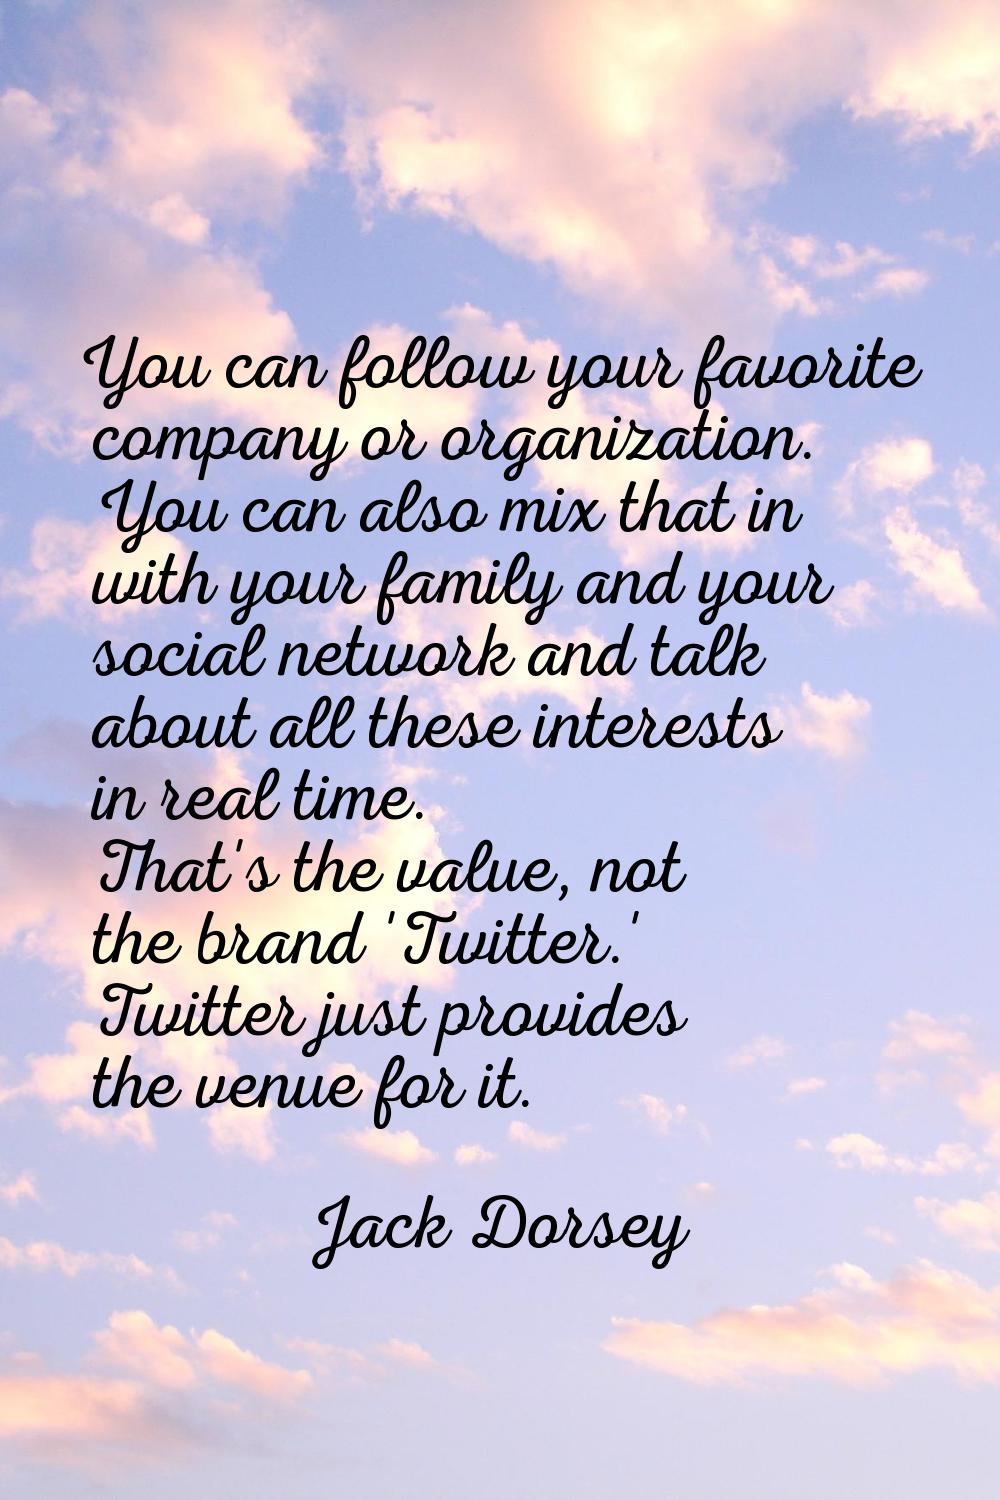 You can follow your favorite company or organization. You can also mix that in with your family and